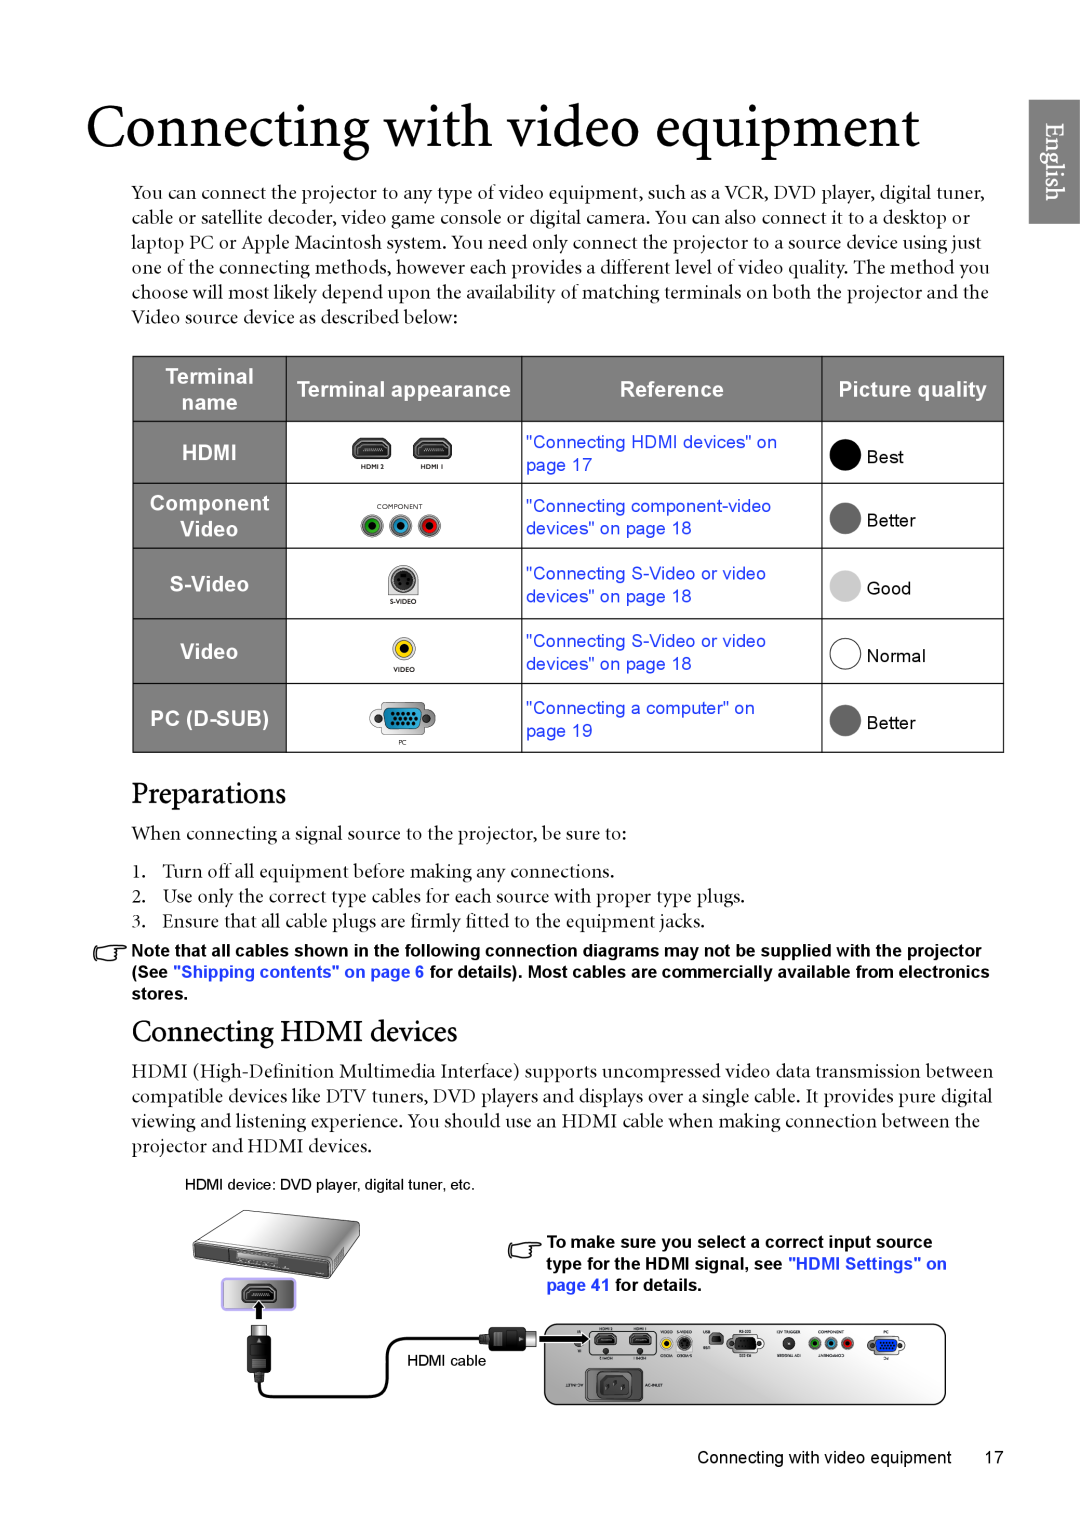 BenQ W6500 user manual Preparations, Connecting HDMI devices, Connecting with video equipment, English 